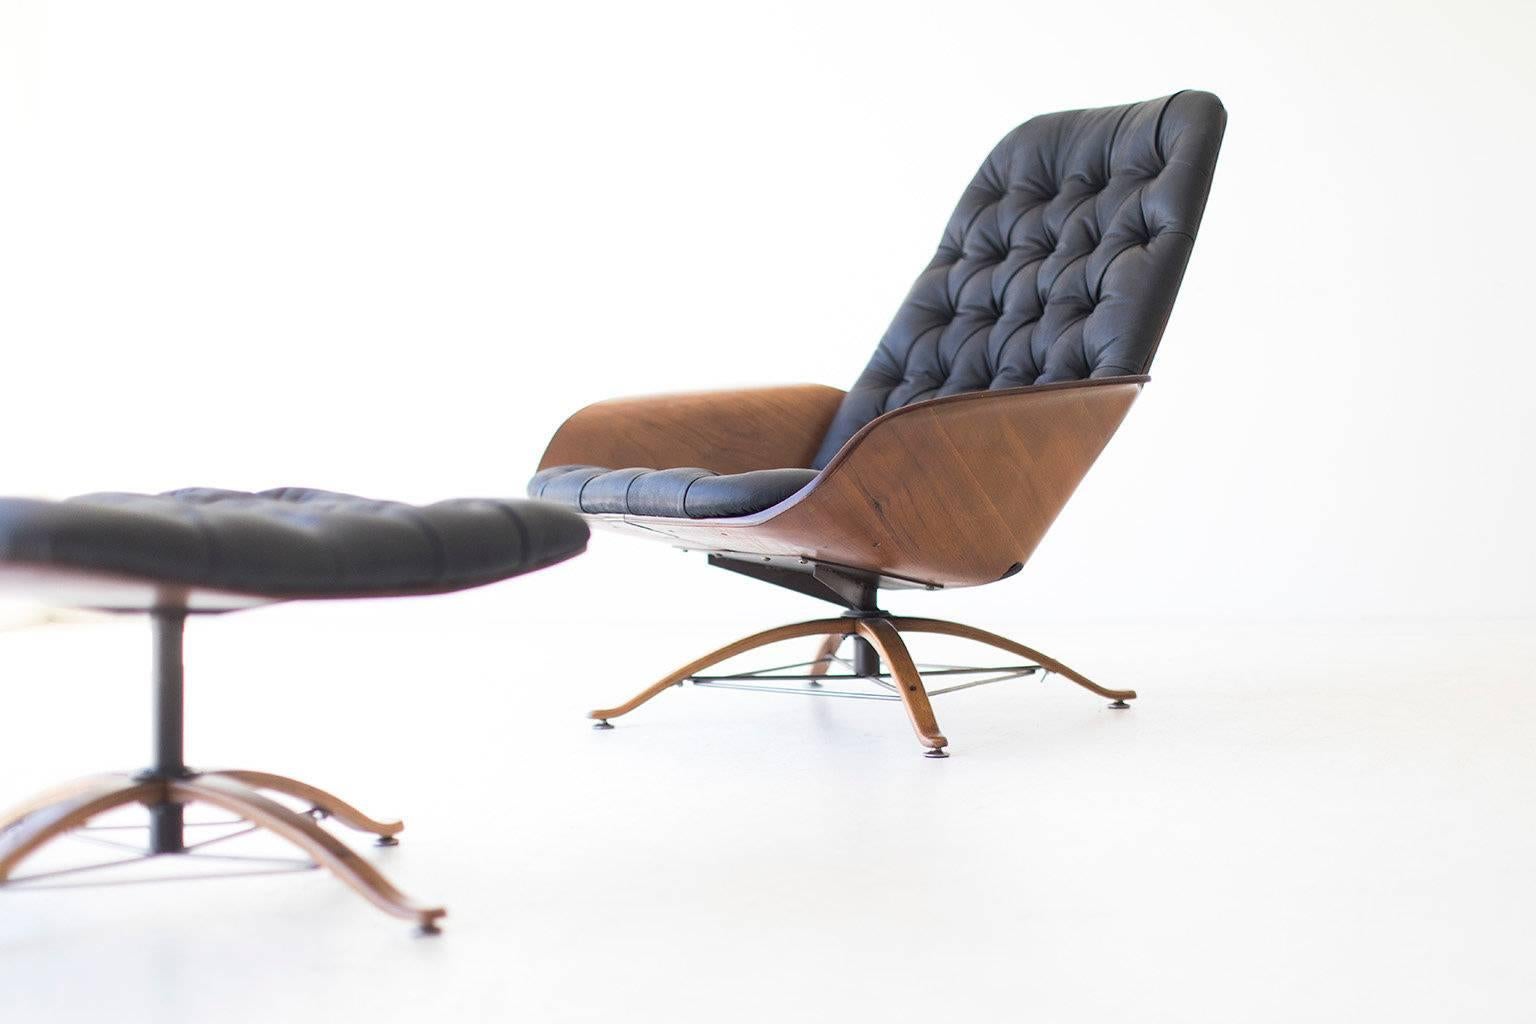 Designer: George Mulhauser

Manufacturer: Plycraft. 
Period/model: Mid-Century Modern. 
Specifications: Walnut Veneer, Oiled Leather. 

Condition: 

This George Mulhauser lounge chair and ottoman for Plycraft have been professionally cleaned